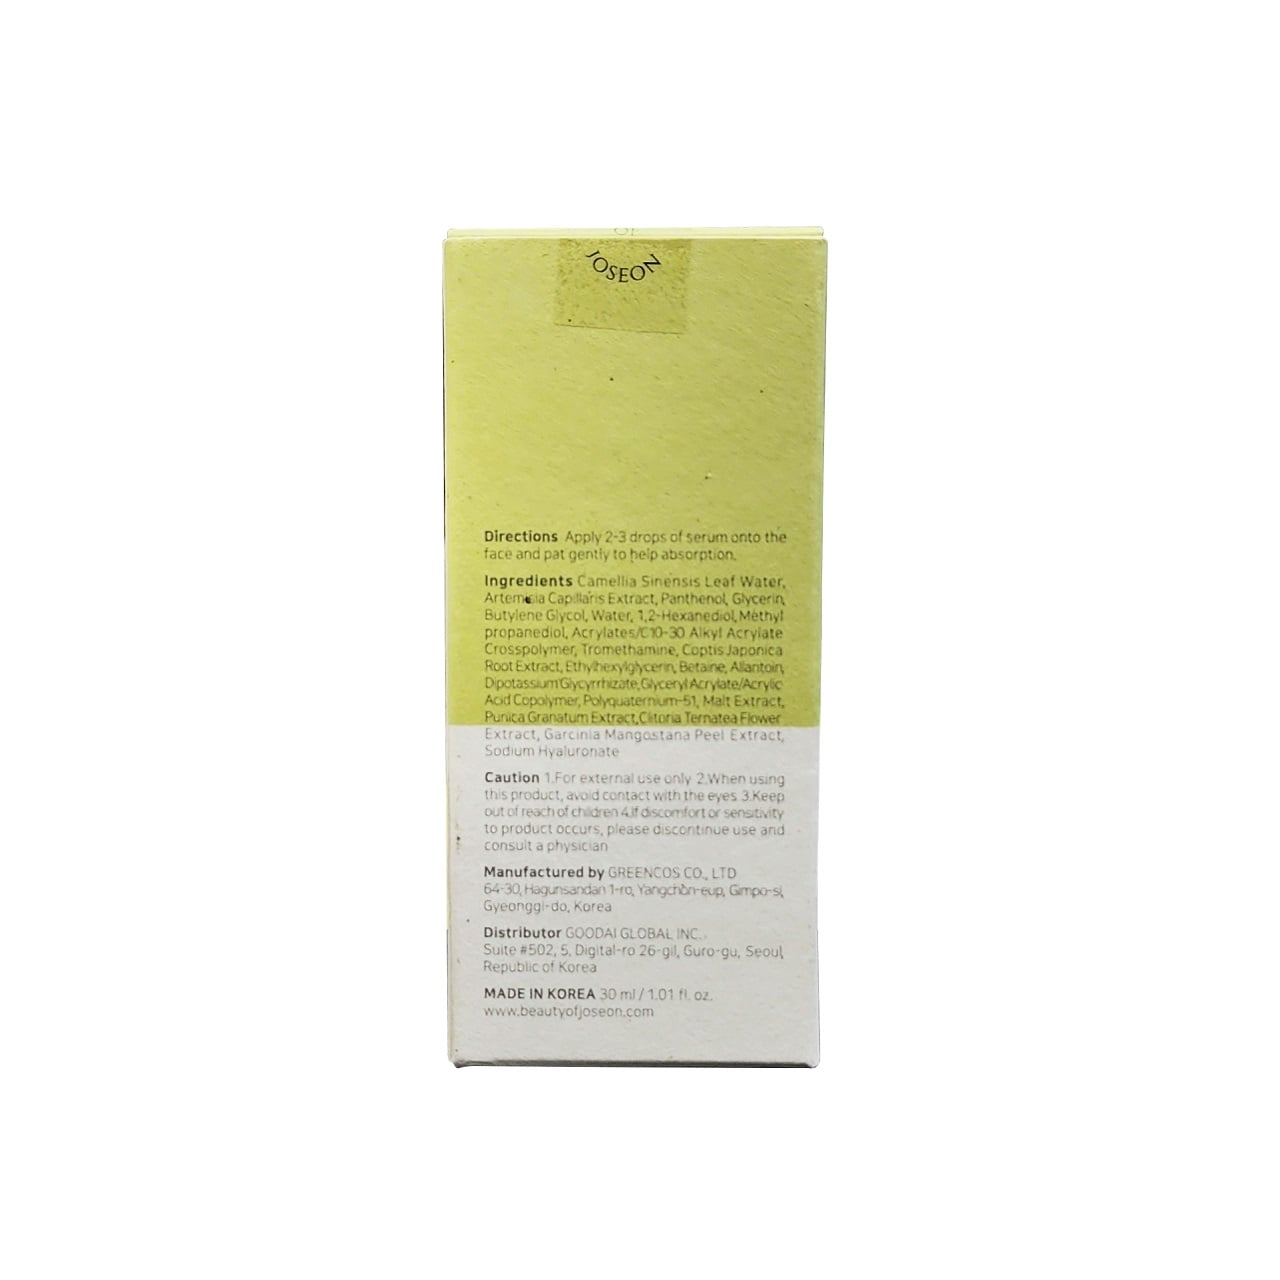 Directions, ingredients, cautions for Beauty of Joseon Calming Serum Green Tea + Panthenol (30 mL) in English